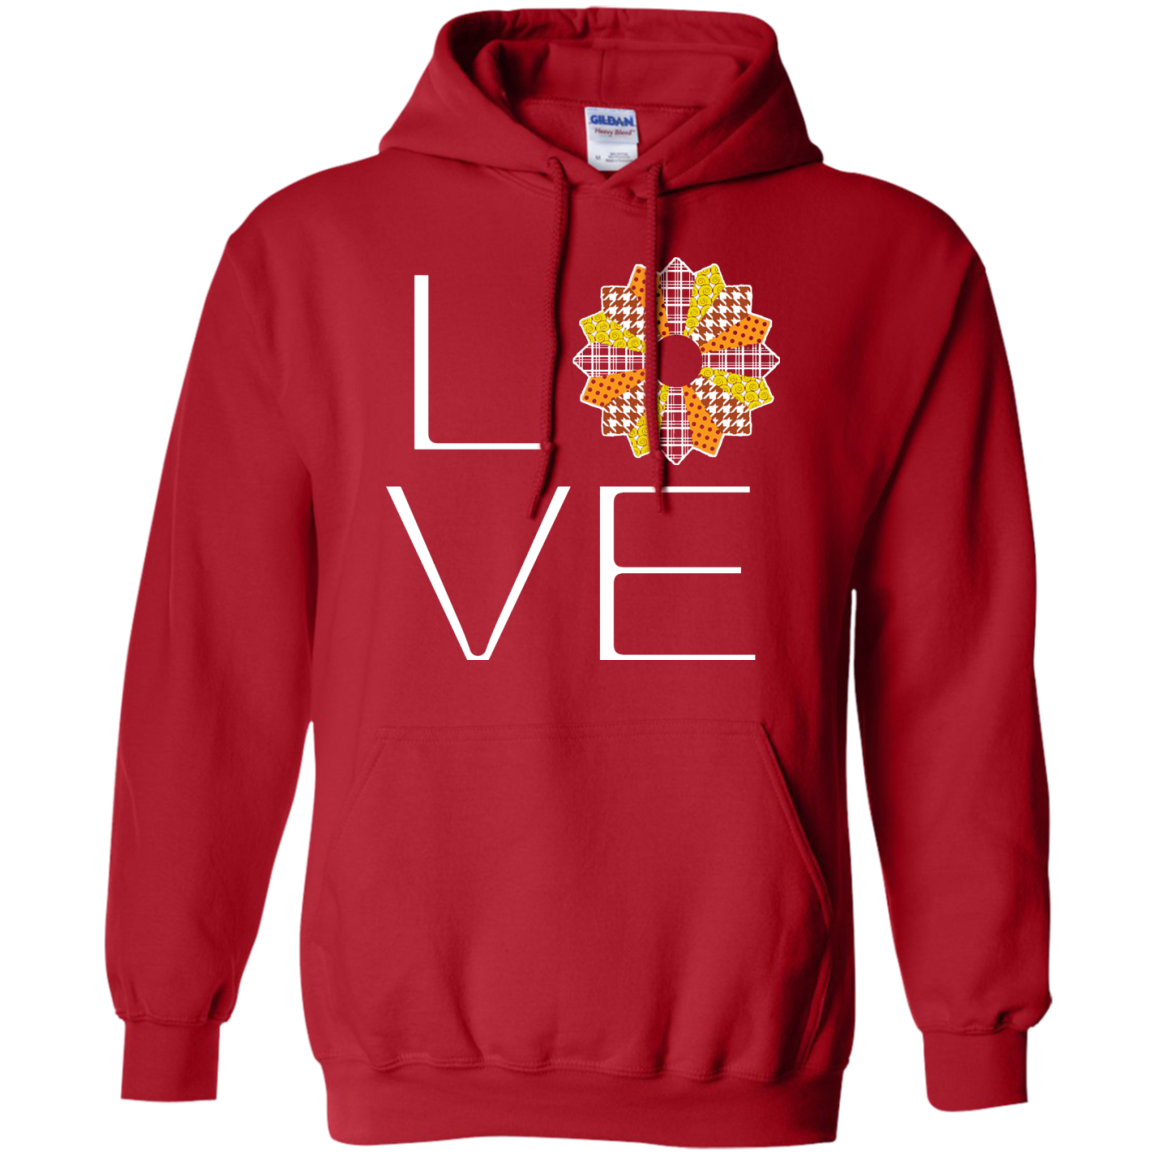 LOVE Quilting (Fall Colors) Pullover Hoodies - Crafter4Life - 5